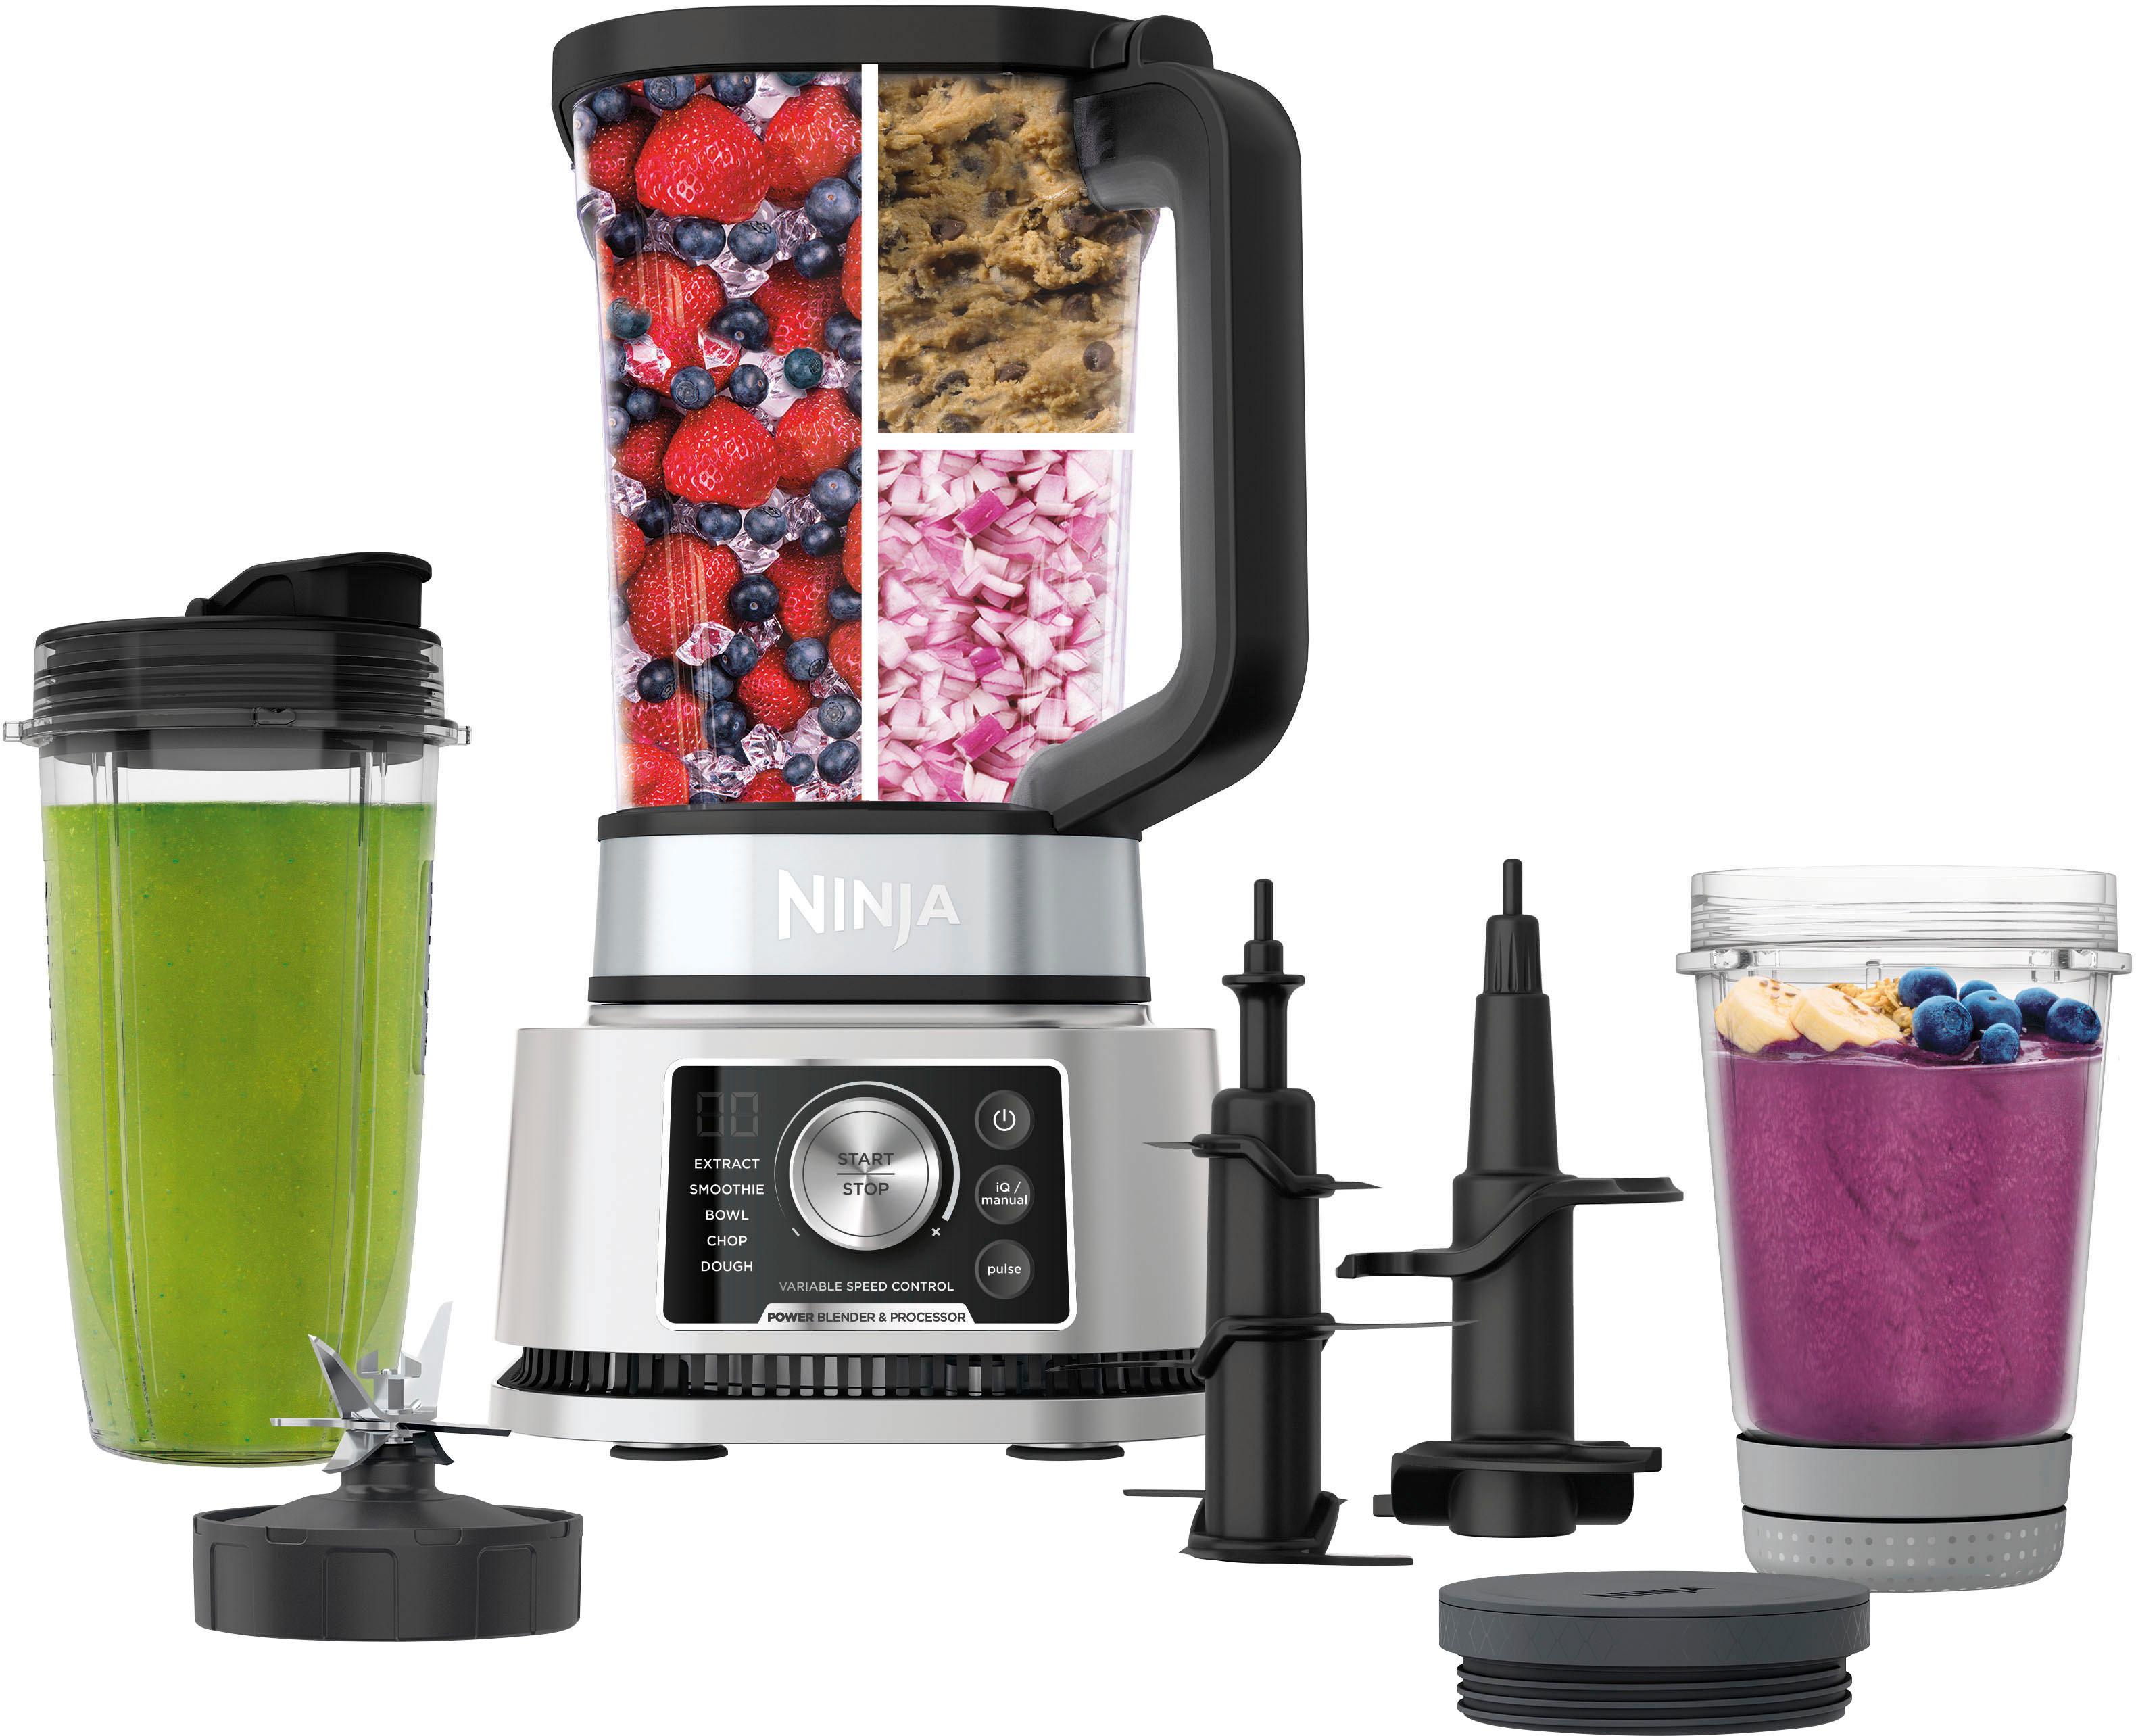 https://i8.amplience.net/i/aarons/6904100/Ninja%20-%20Foodi%20Power%20Blender%20&%20Processor%20System,%20Smoothie%20Bowl%20Maker%20&%20Nutrient%20Extractor*,%201400WP%20smartTORQUE%206%20Auto-iQ%20-%20Silver?$large$